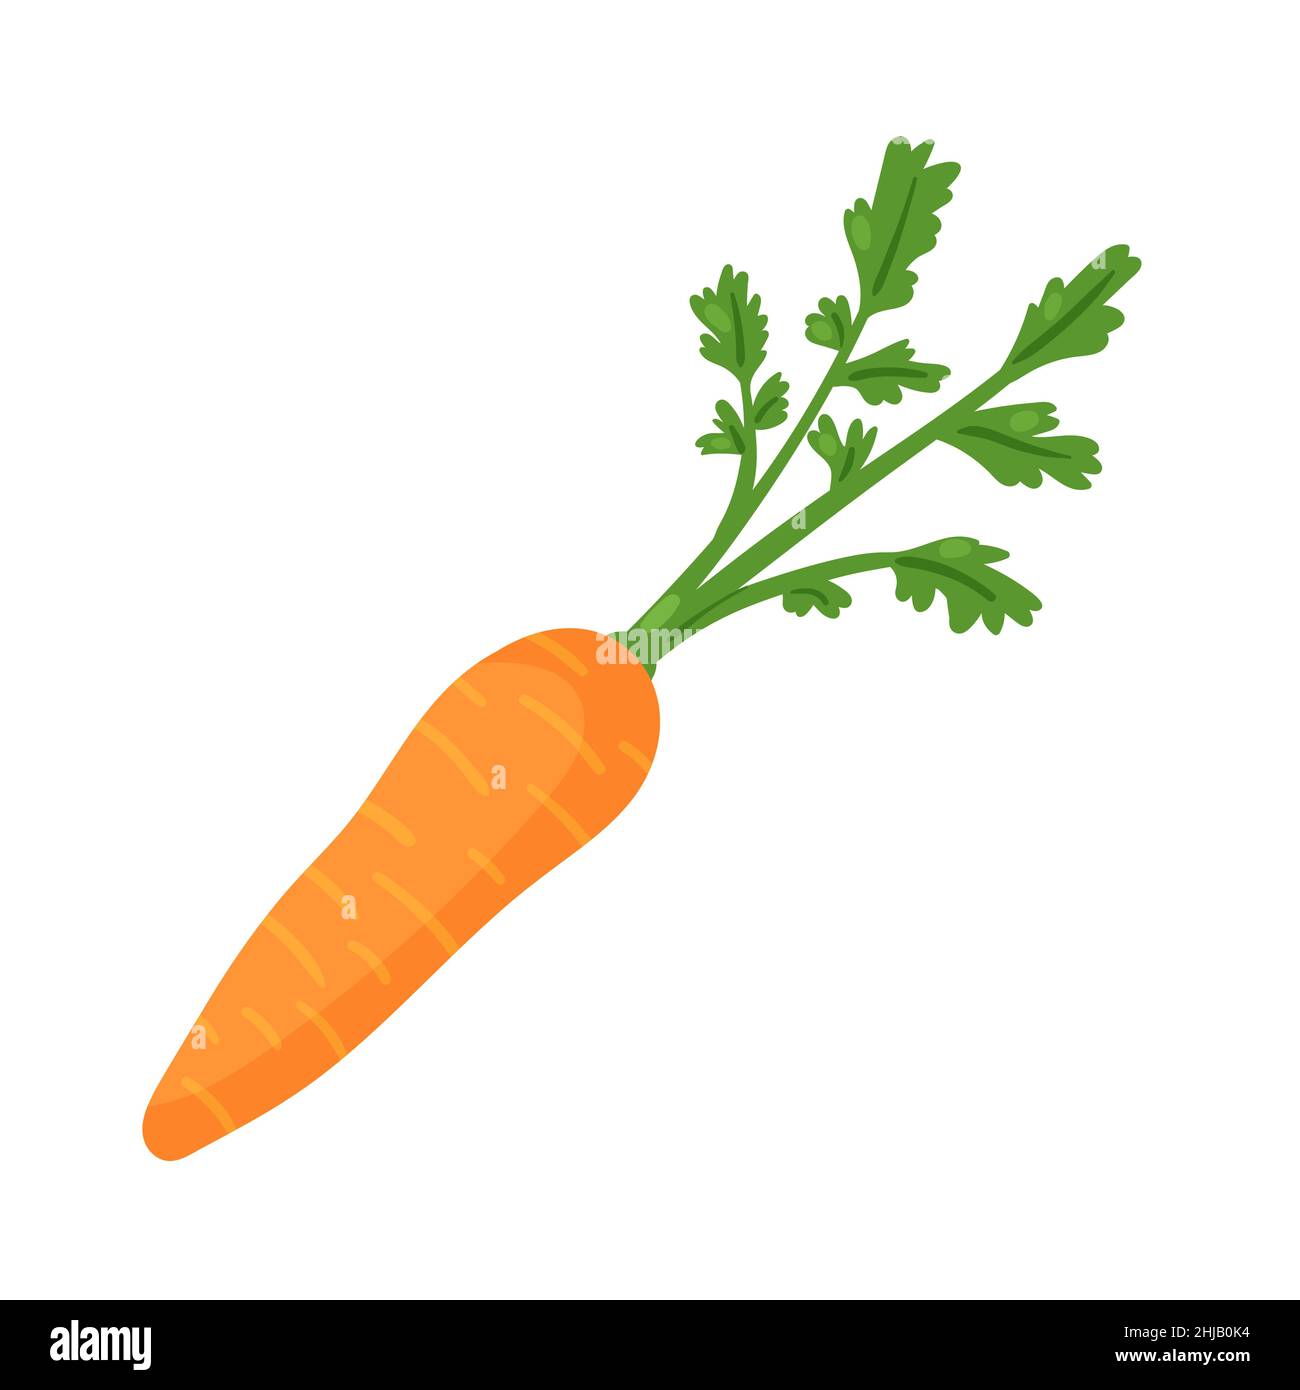 Carrot vegetable fresh veg product, organic farm food production vector illustration. Cartoon healthy orange raw carrot with leaves for vegetarian cuisine isolated on white Stock Vector